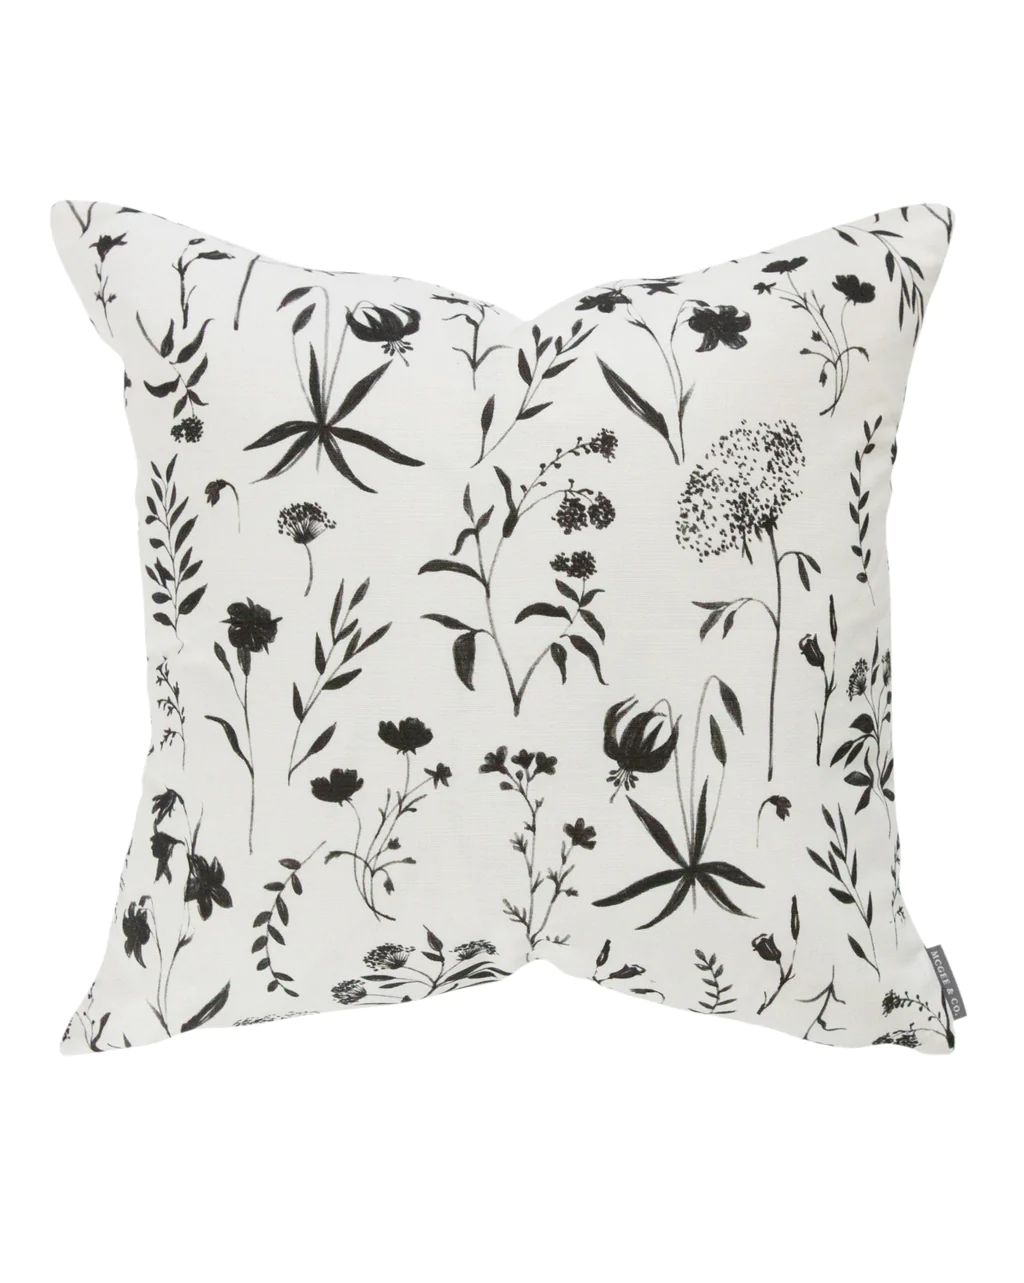 Juno Floral Pillow Cover | McGee & Co.